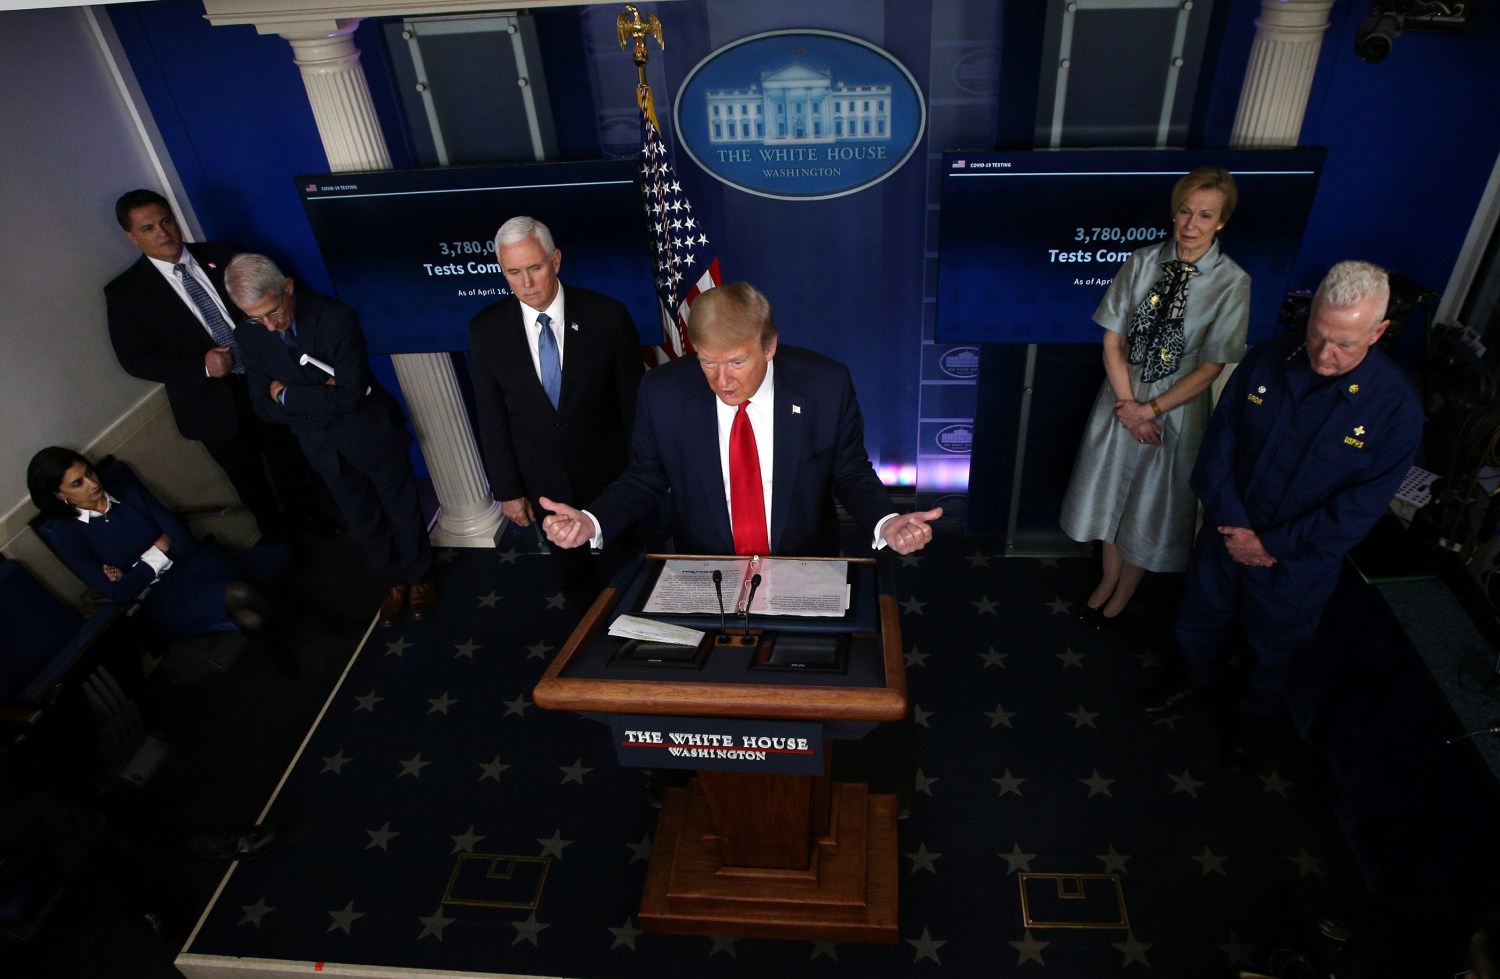 U.S. President Donald Trump answers questions at the daily coronavirus disease (COVID-19) task force briefing flanked by Dr. Anthony Fauci, Vice President Mike Pence, Dr. Deborah Birx and Admiral Brett Giroir at the White House in Washington, U.S., April 17, 2020. Picture taken April 17, 2020. REUTERS/Leah Millis